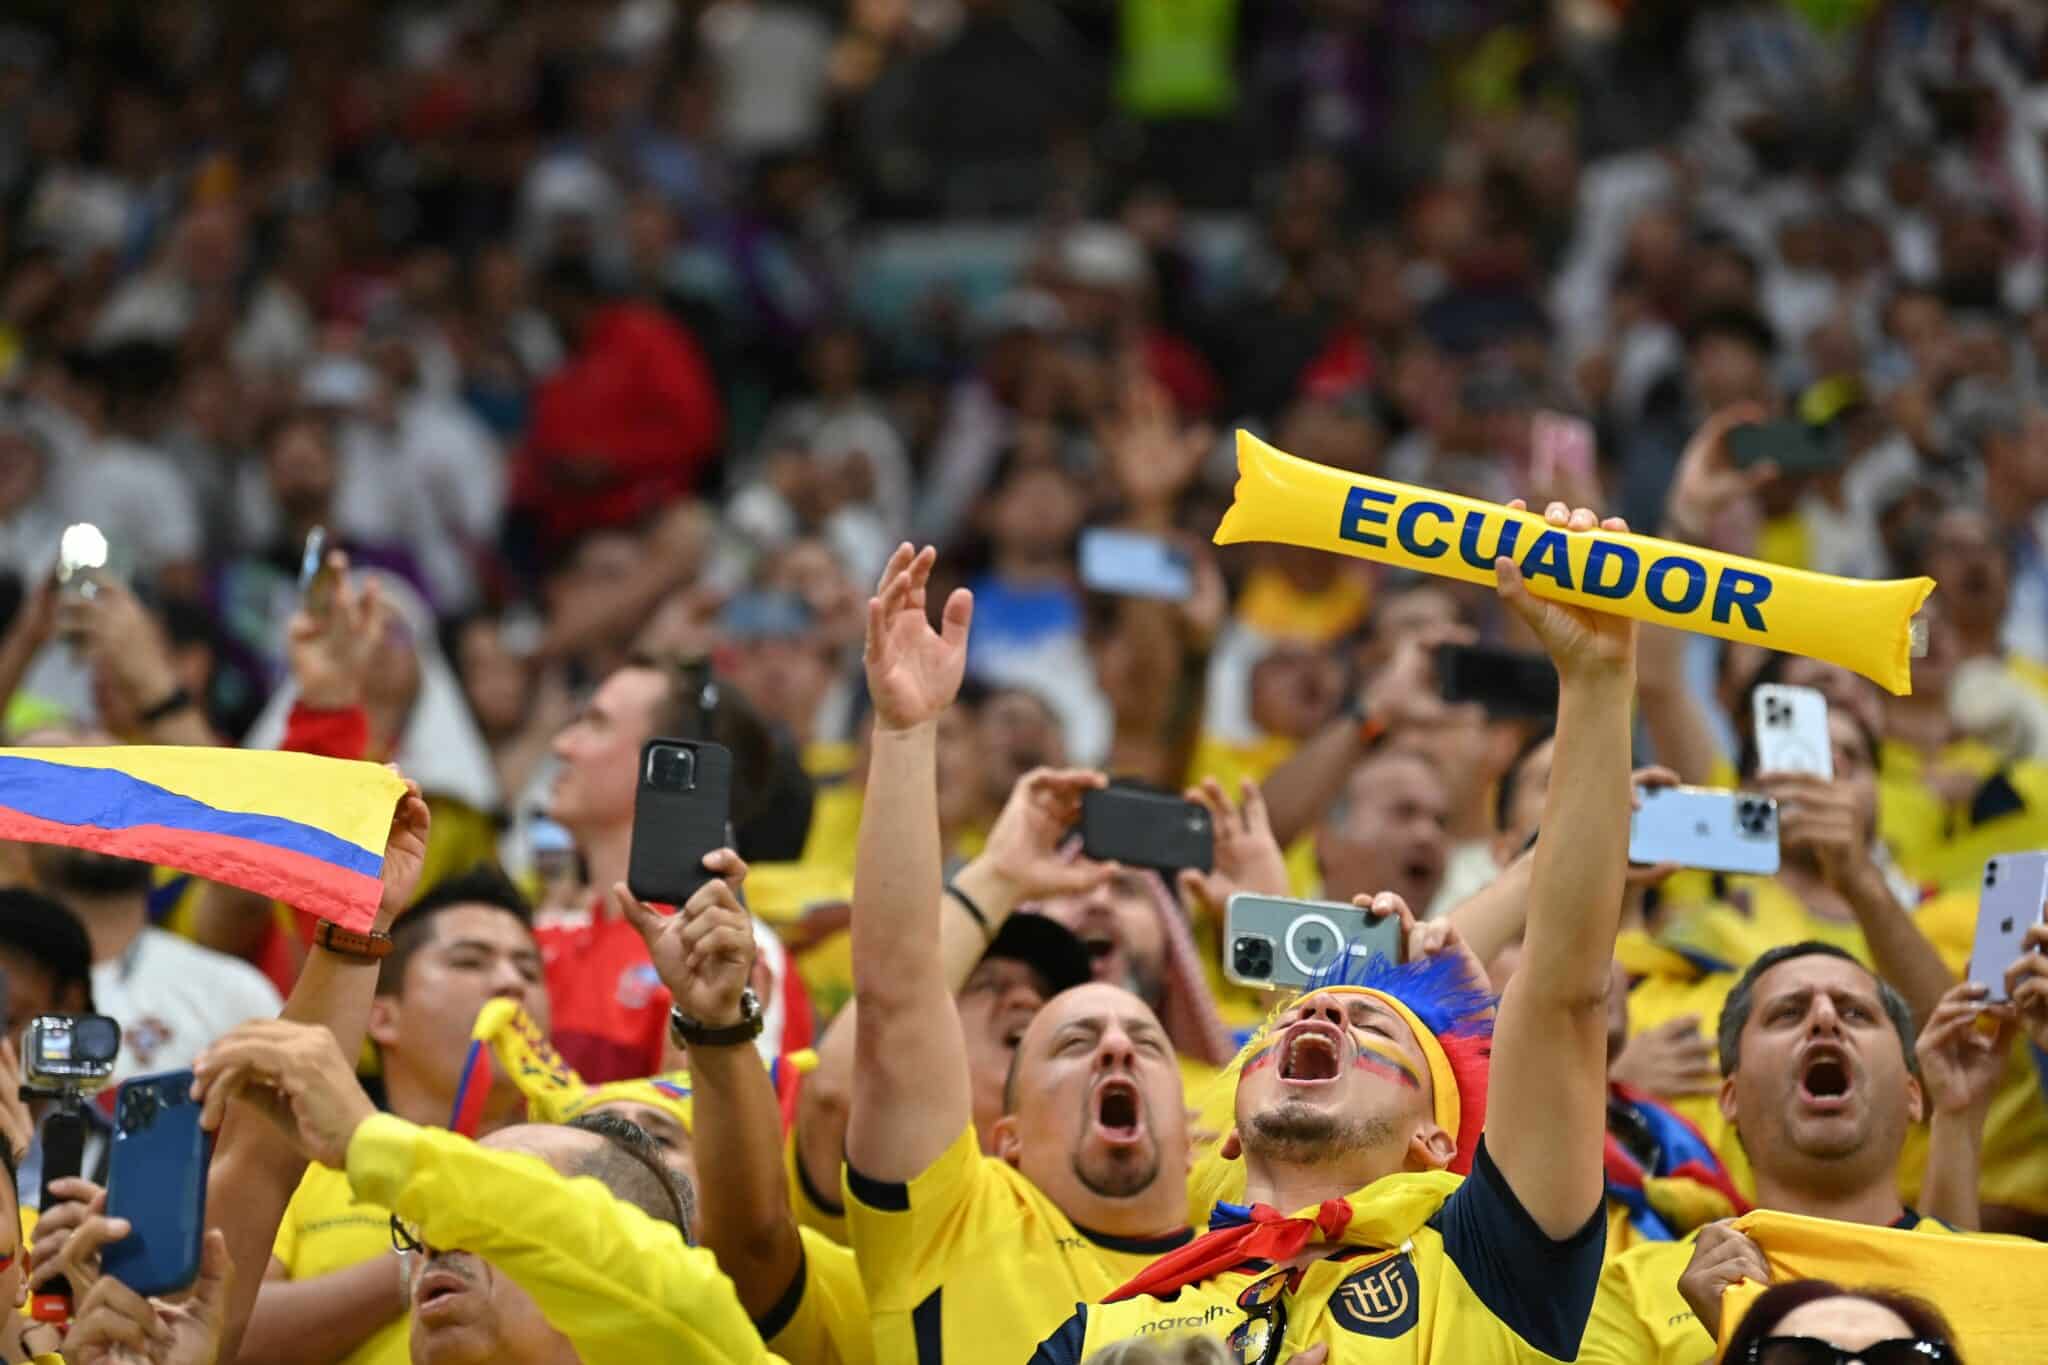 Ecuador supporters cheer ahead of the Qatar 2022 World Cup Group A football match between Qatar and Ecuador at the Al-Bayt Stadium in Al Khor, north of Doha on November 20, 2022. (Photo by Glyn KIRK / AFP) (Photo by GLYN KIRK/AFP via Getty Images)